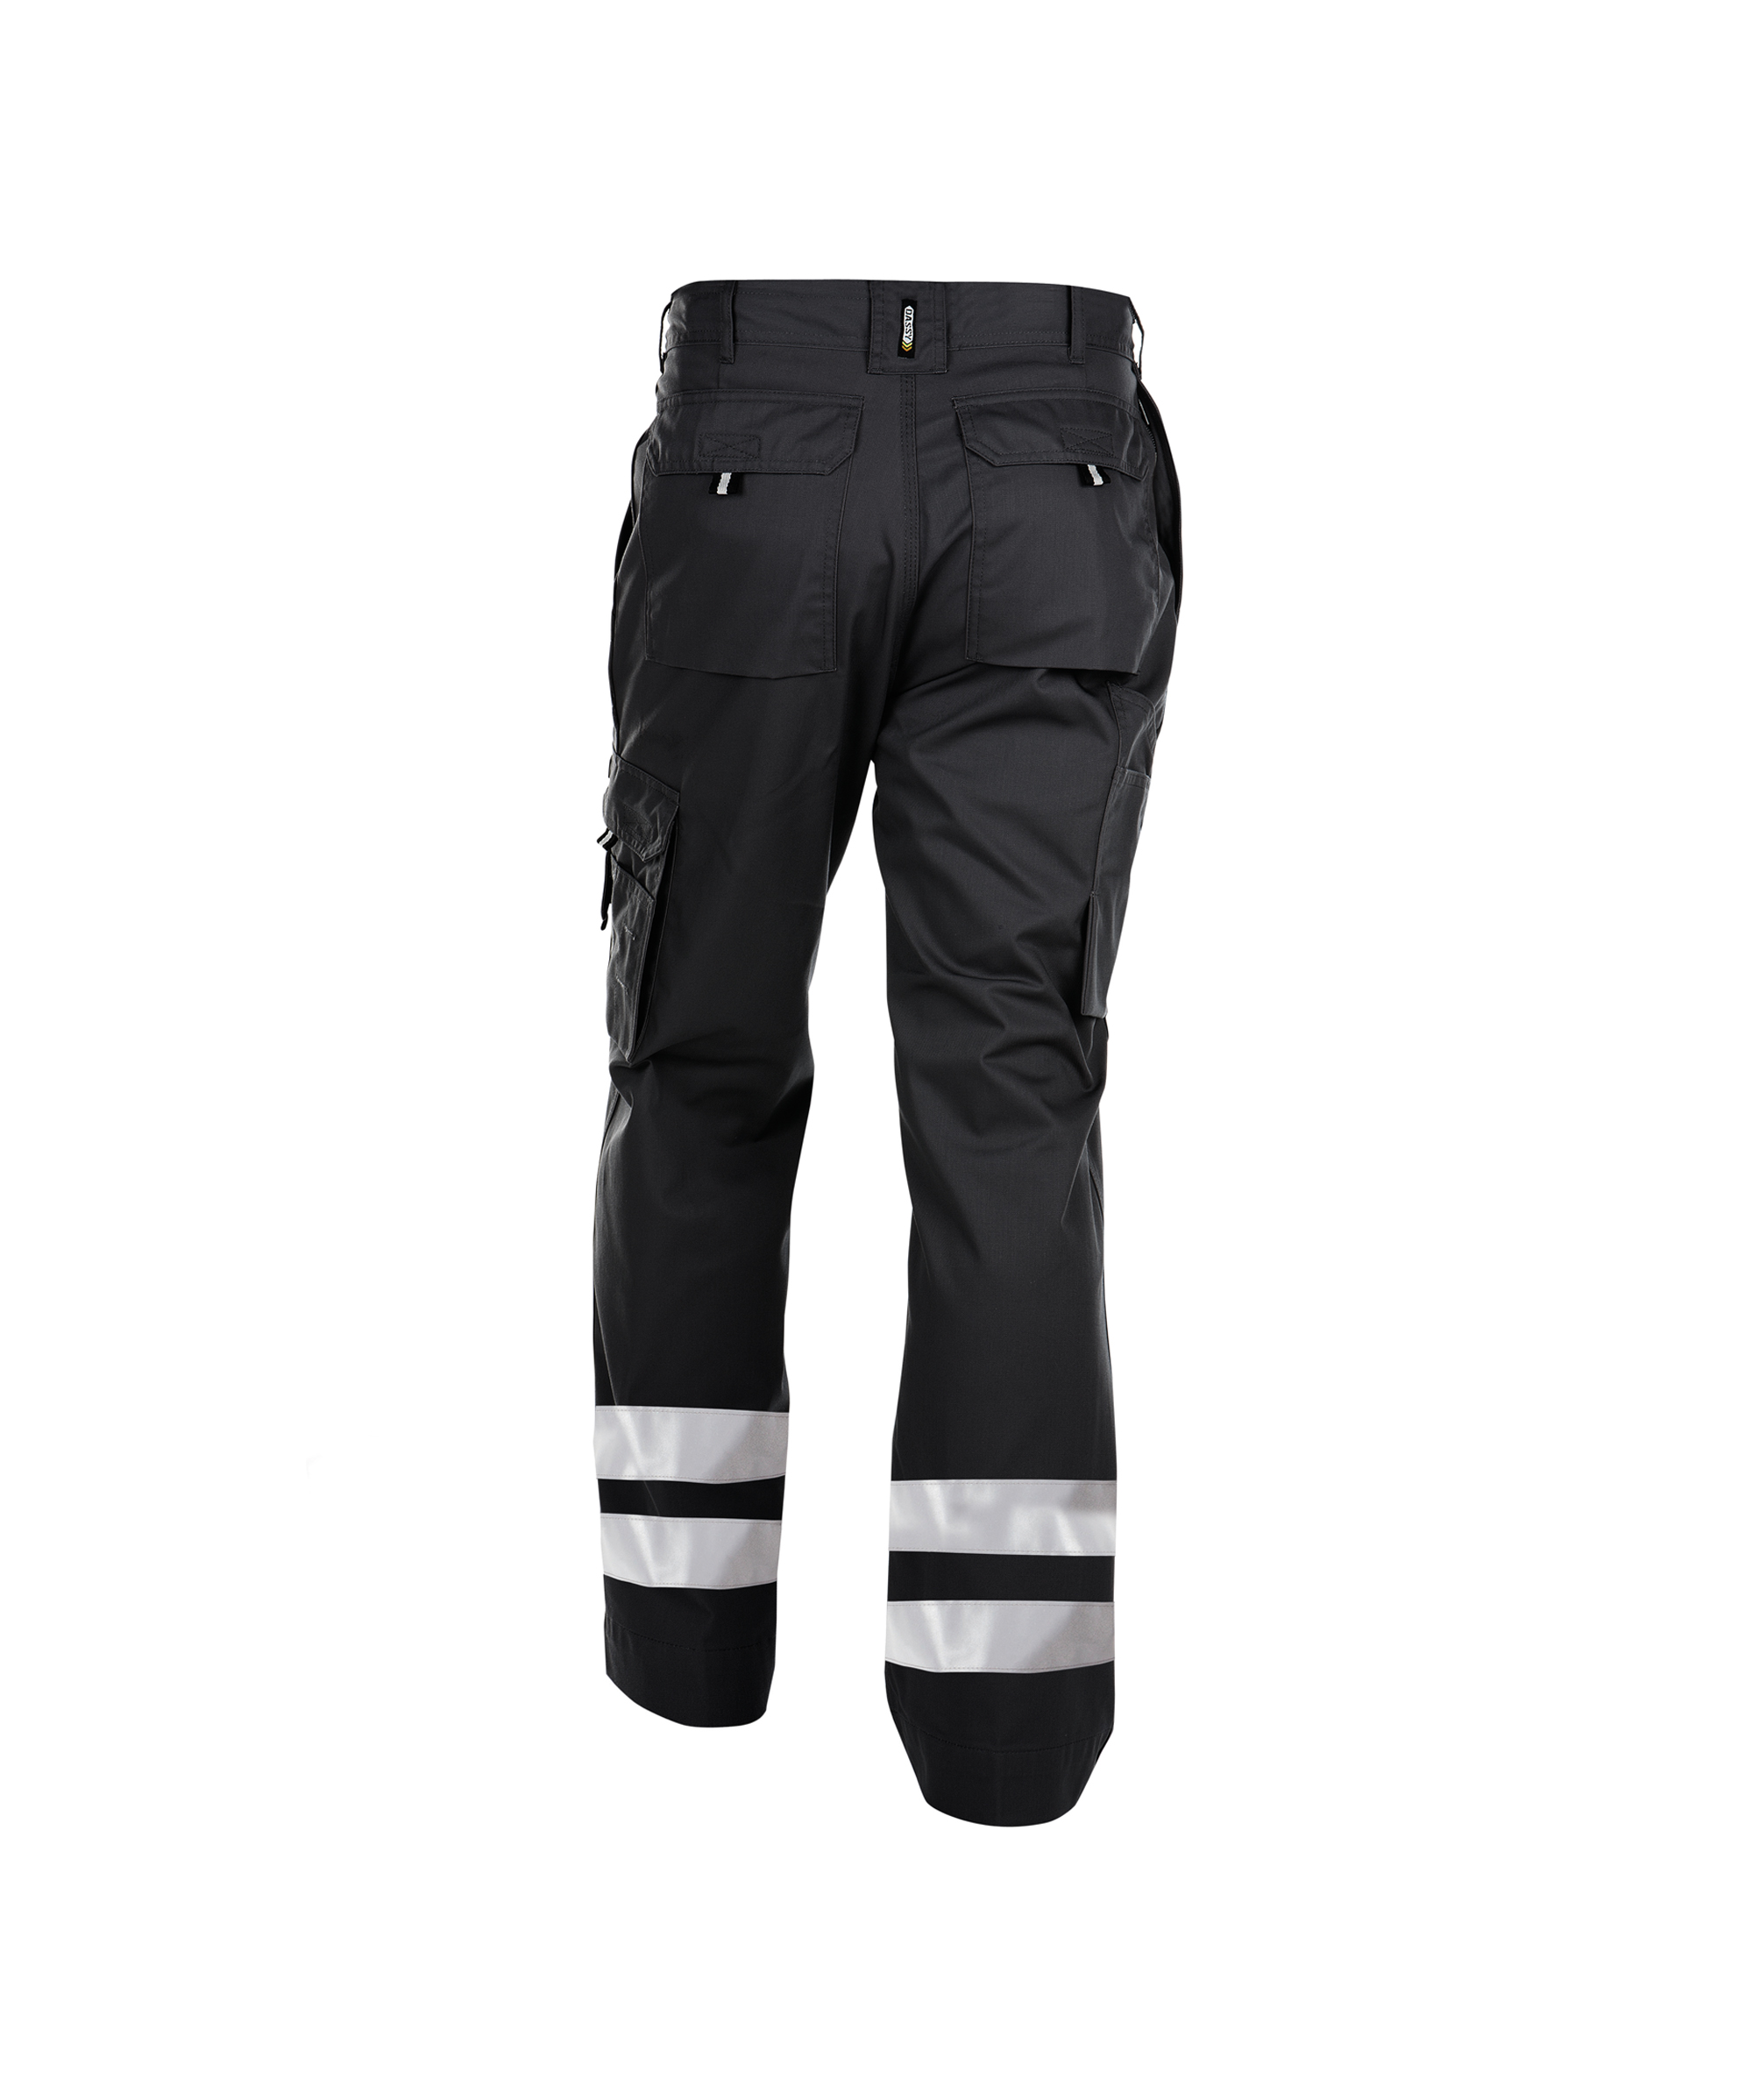 vegas_work-trousers-with-reflective-tape_black_back.jpg